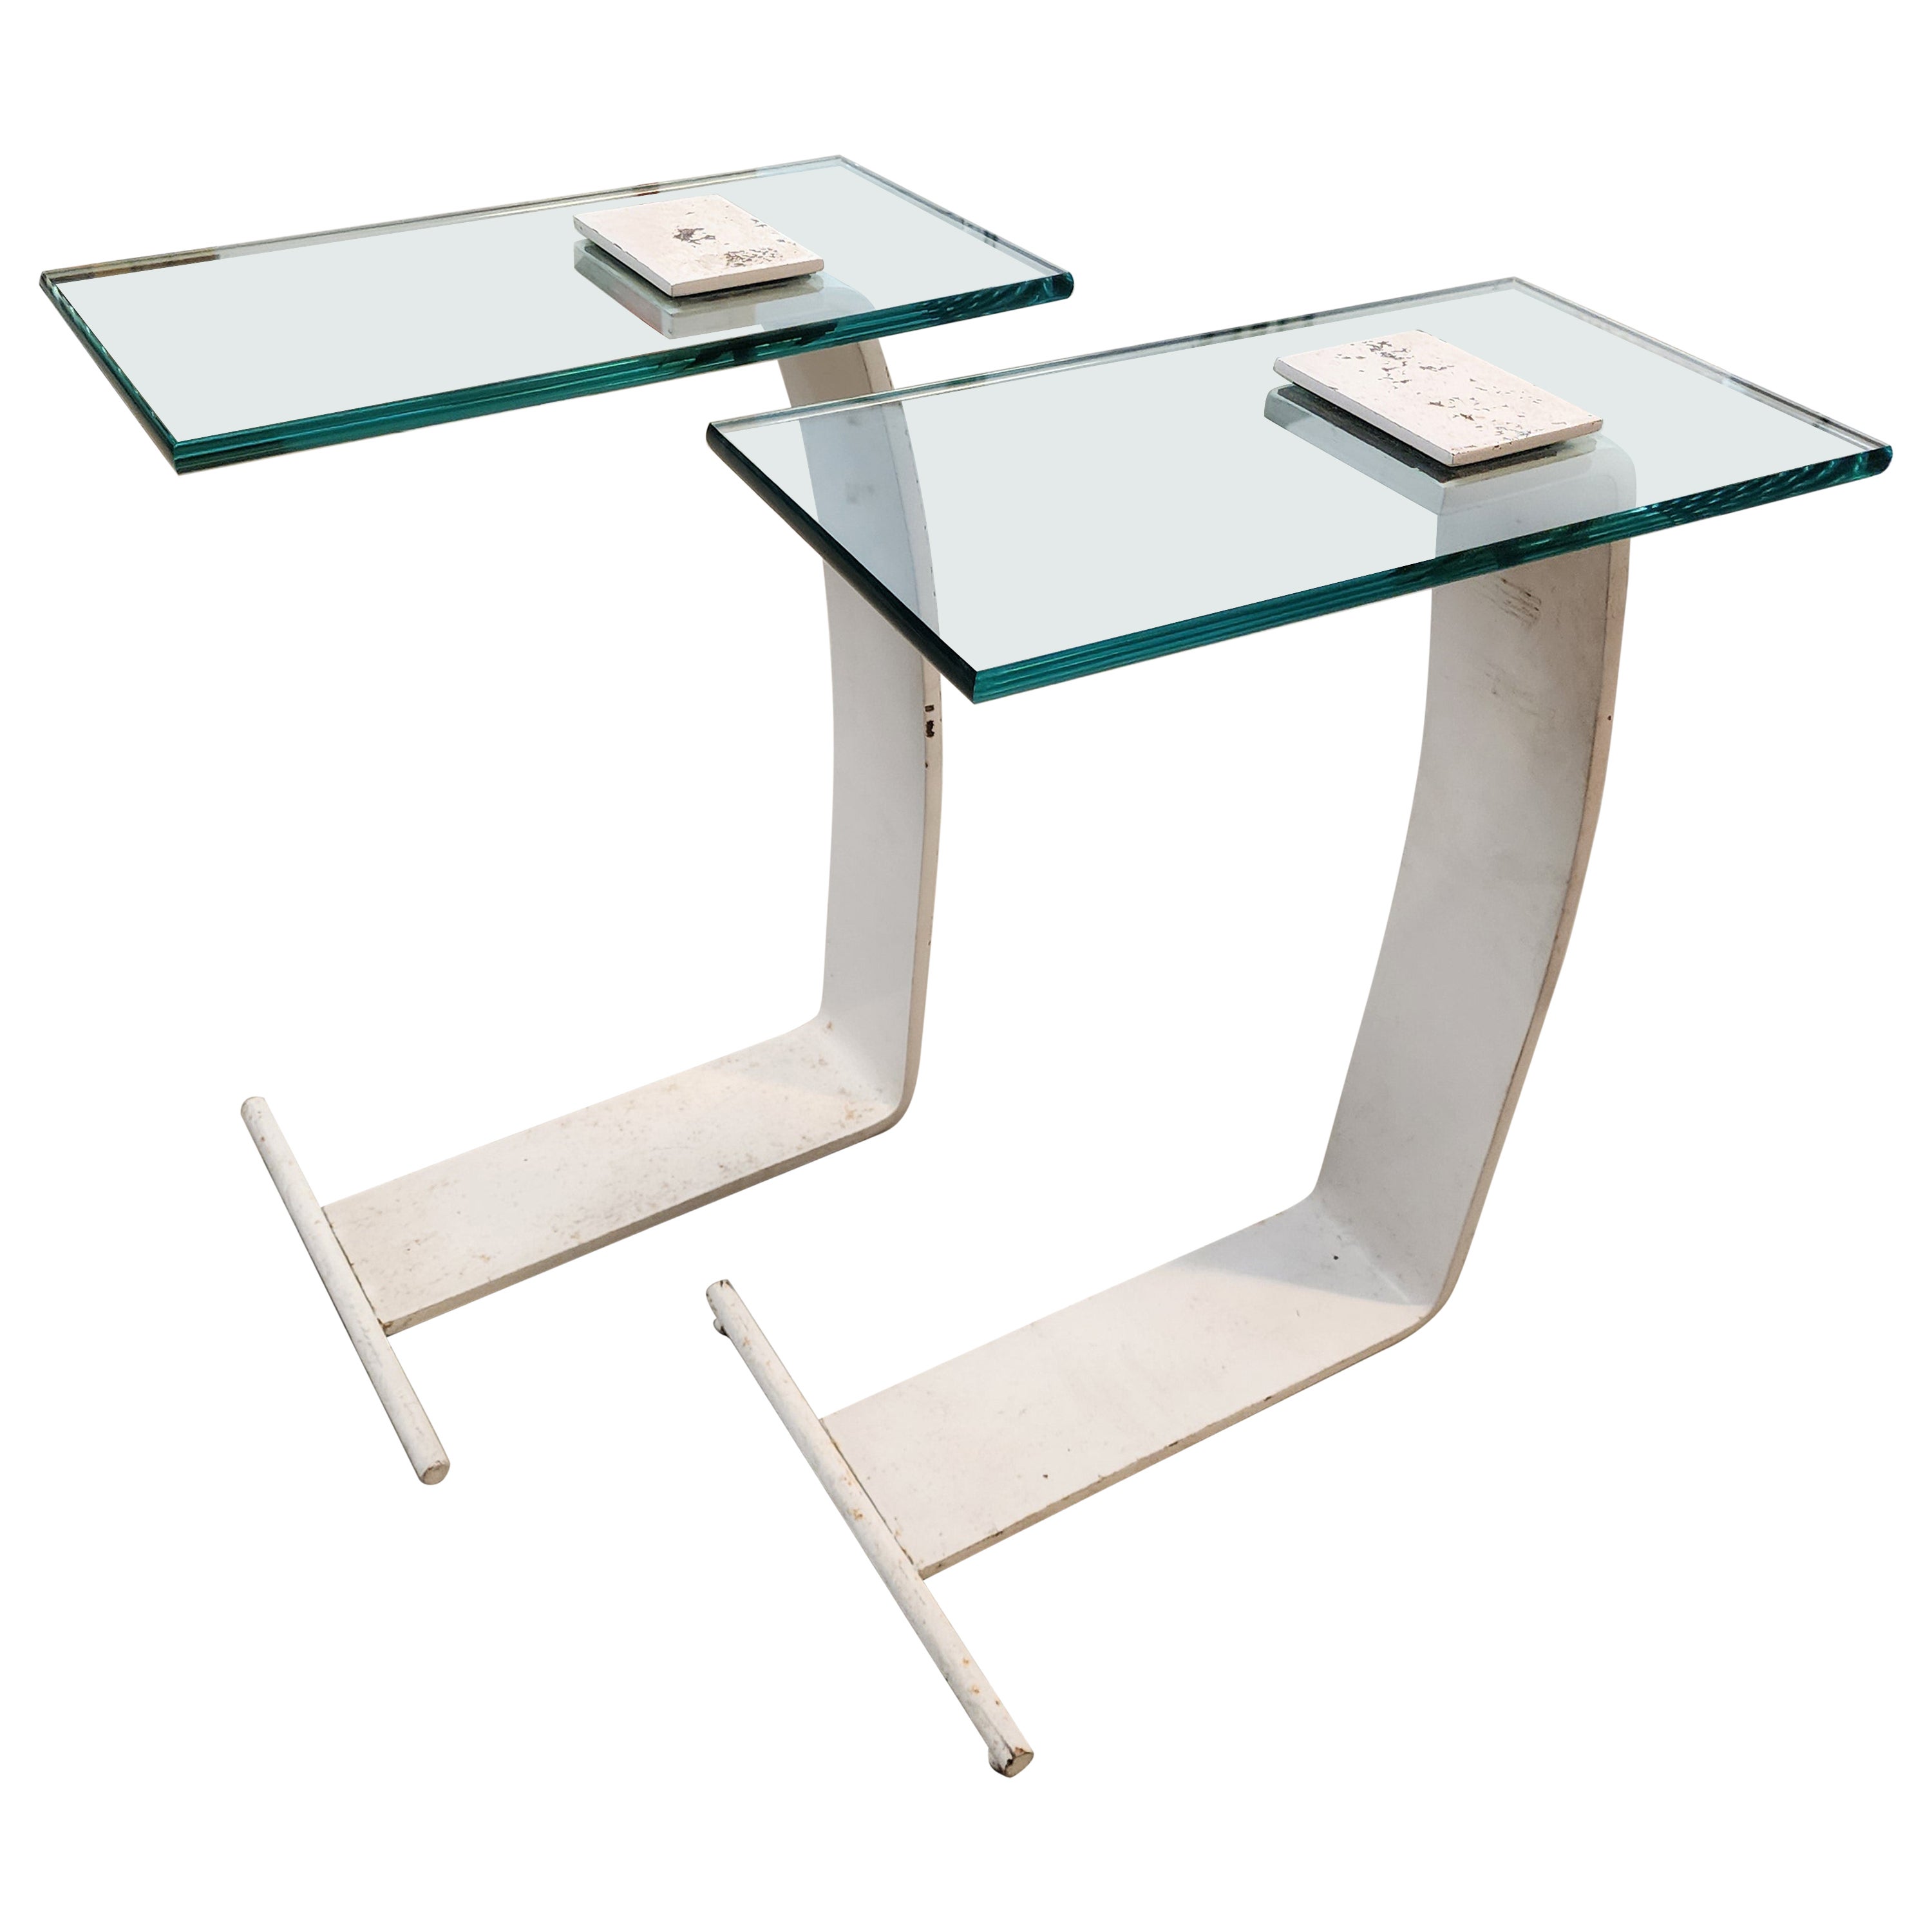 Pair of Steel and Glass Cantilevered Side Tables by Design Institute of America For Sale